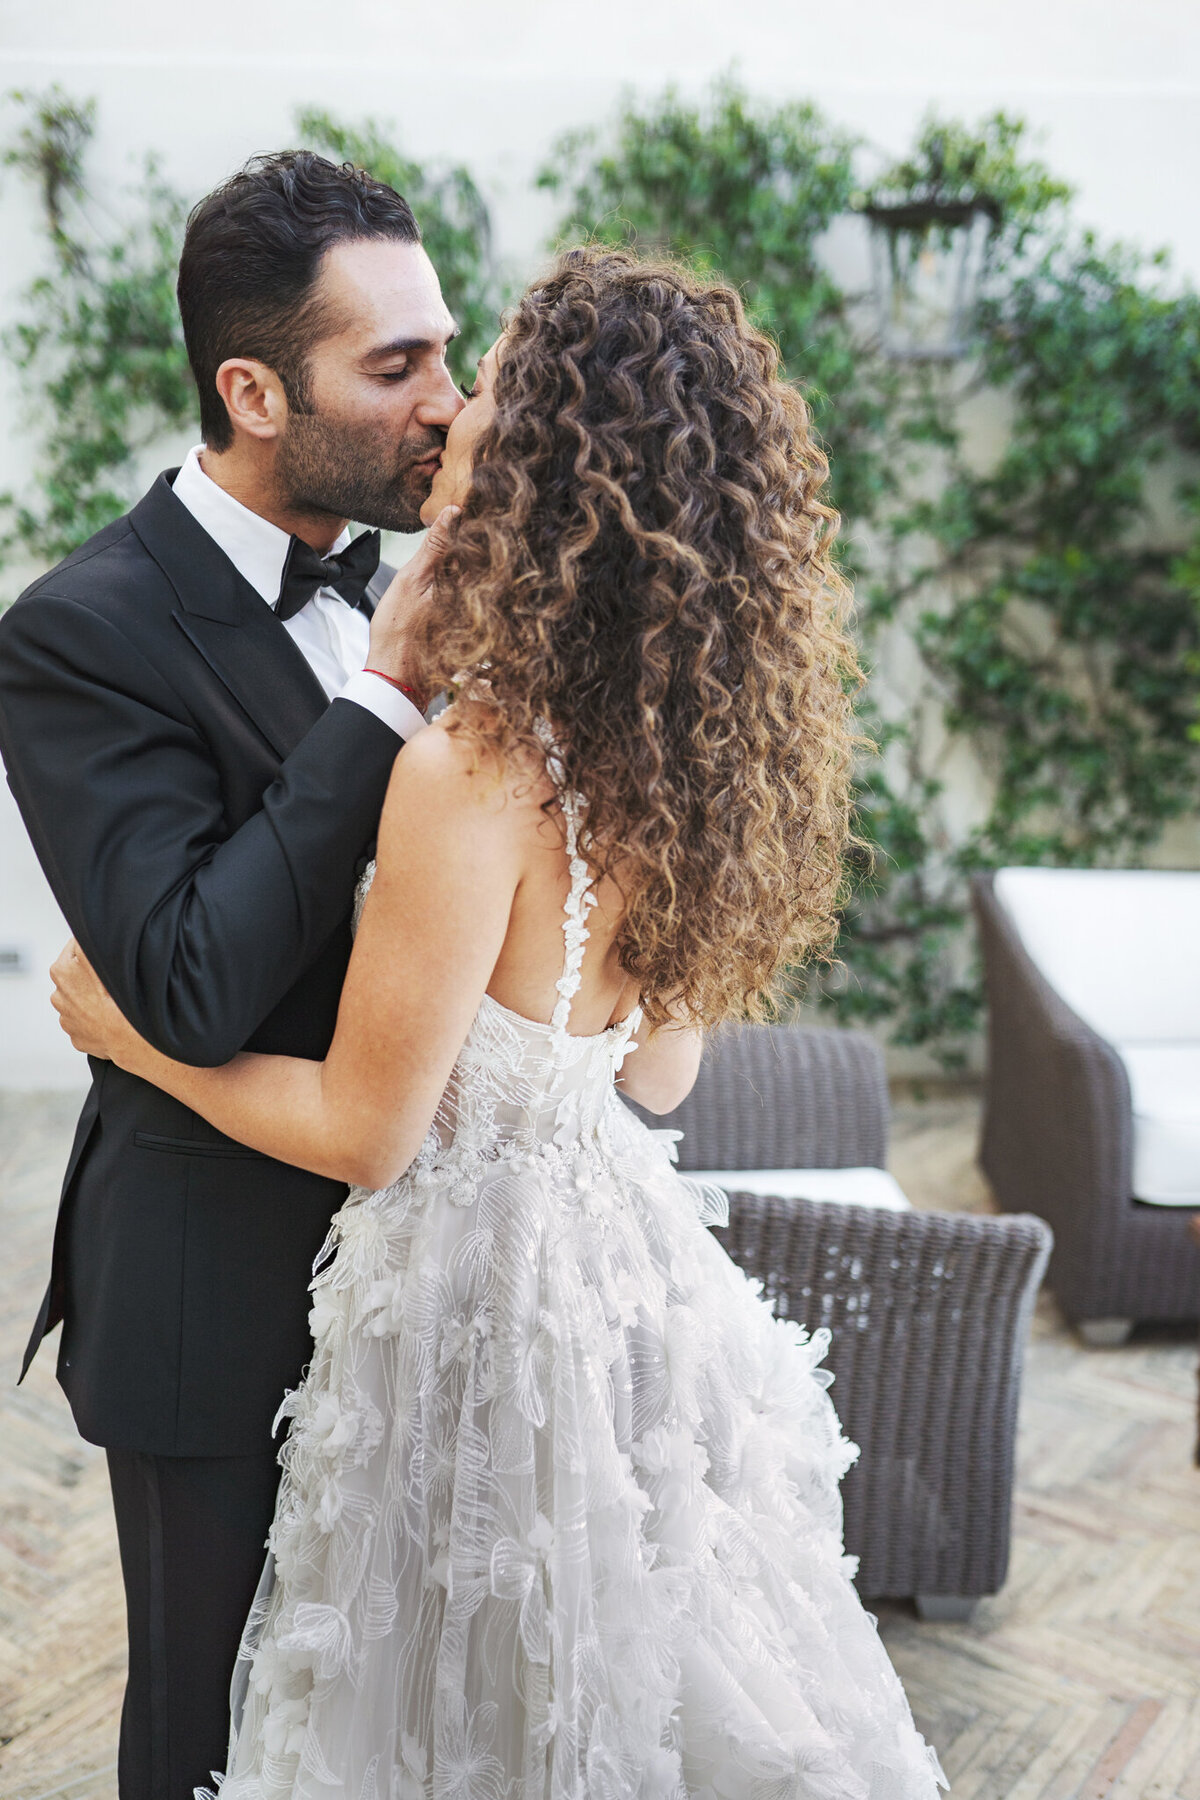 Bride and groom first kiss on a destination wedding day in Italy